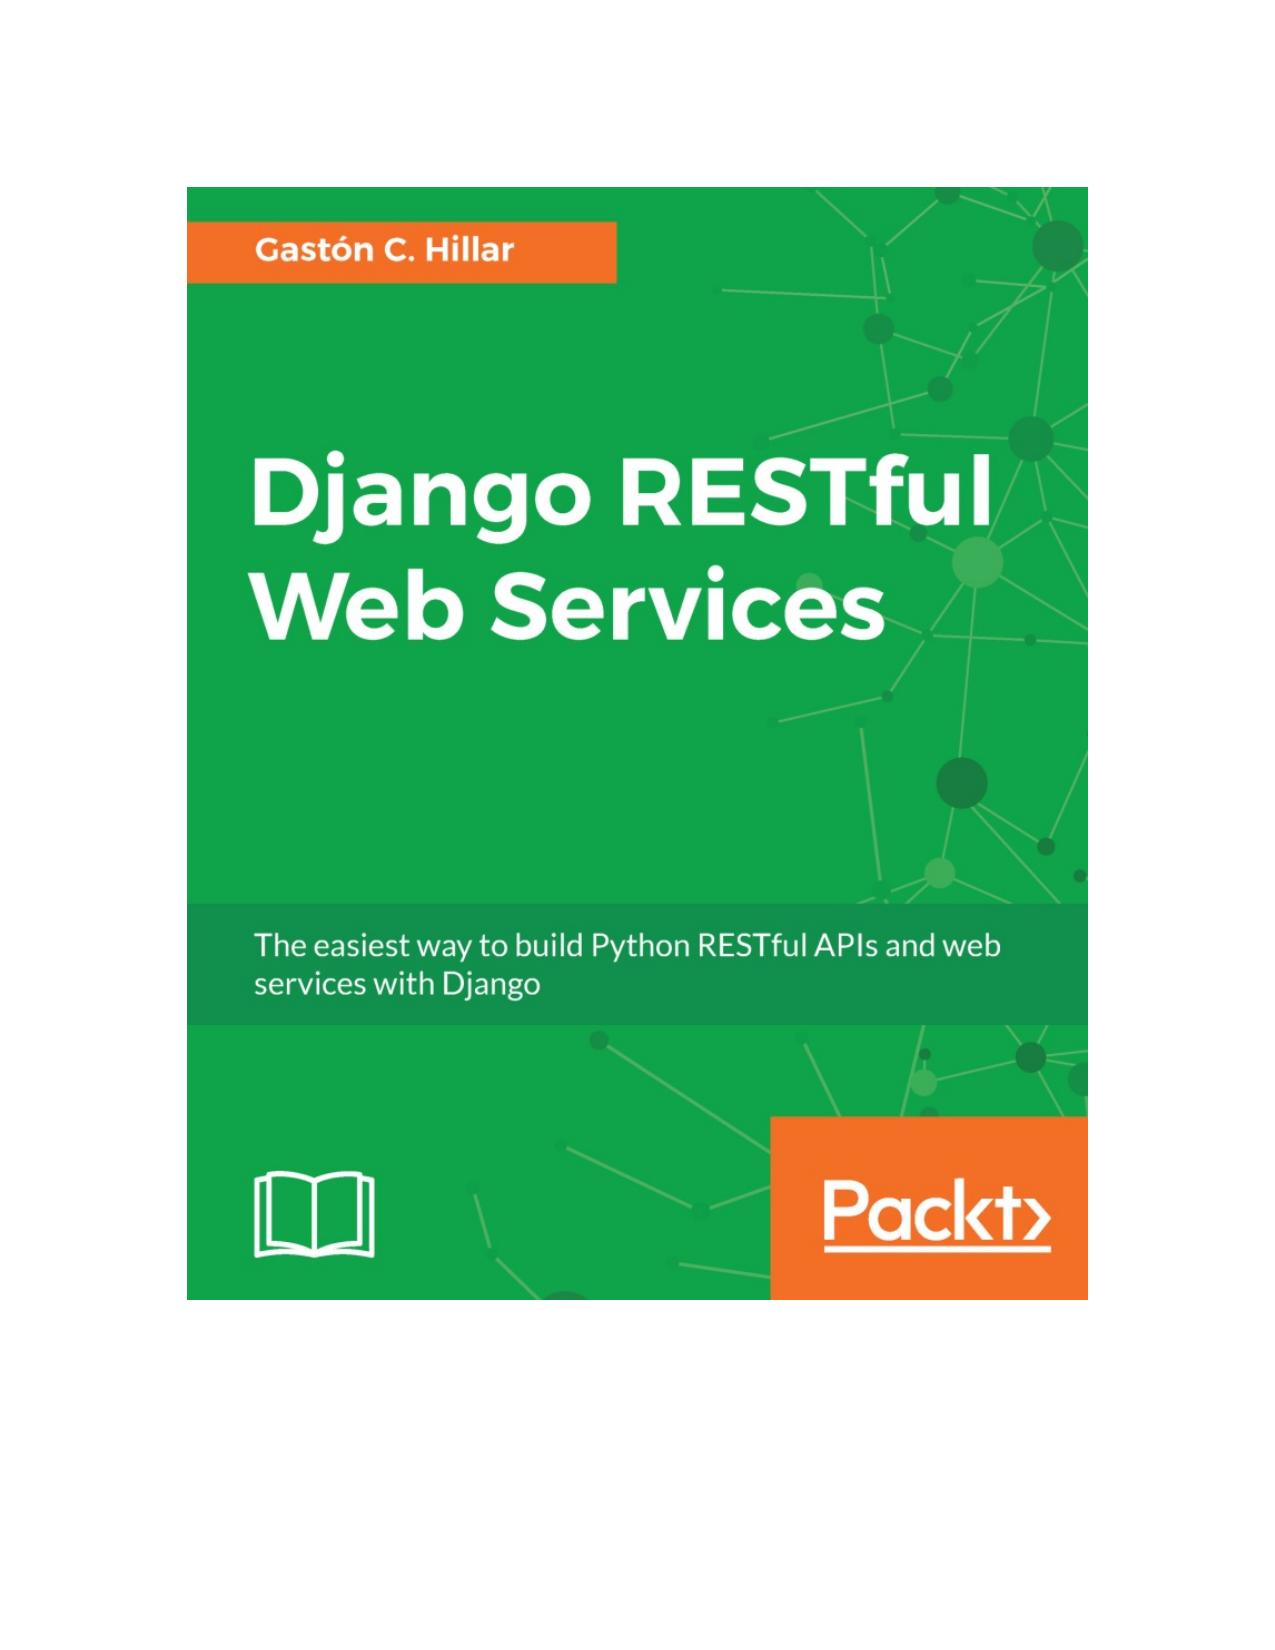 Django RESTful Web Services: The Easiest Way to Build Python RESTful APIs and Web Services With Django